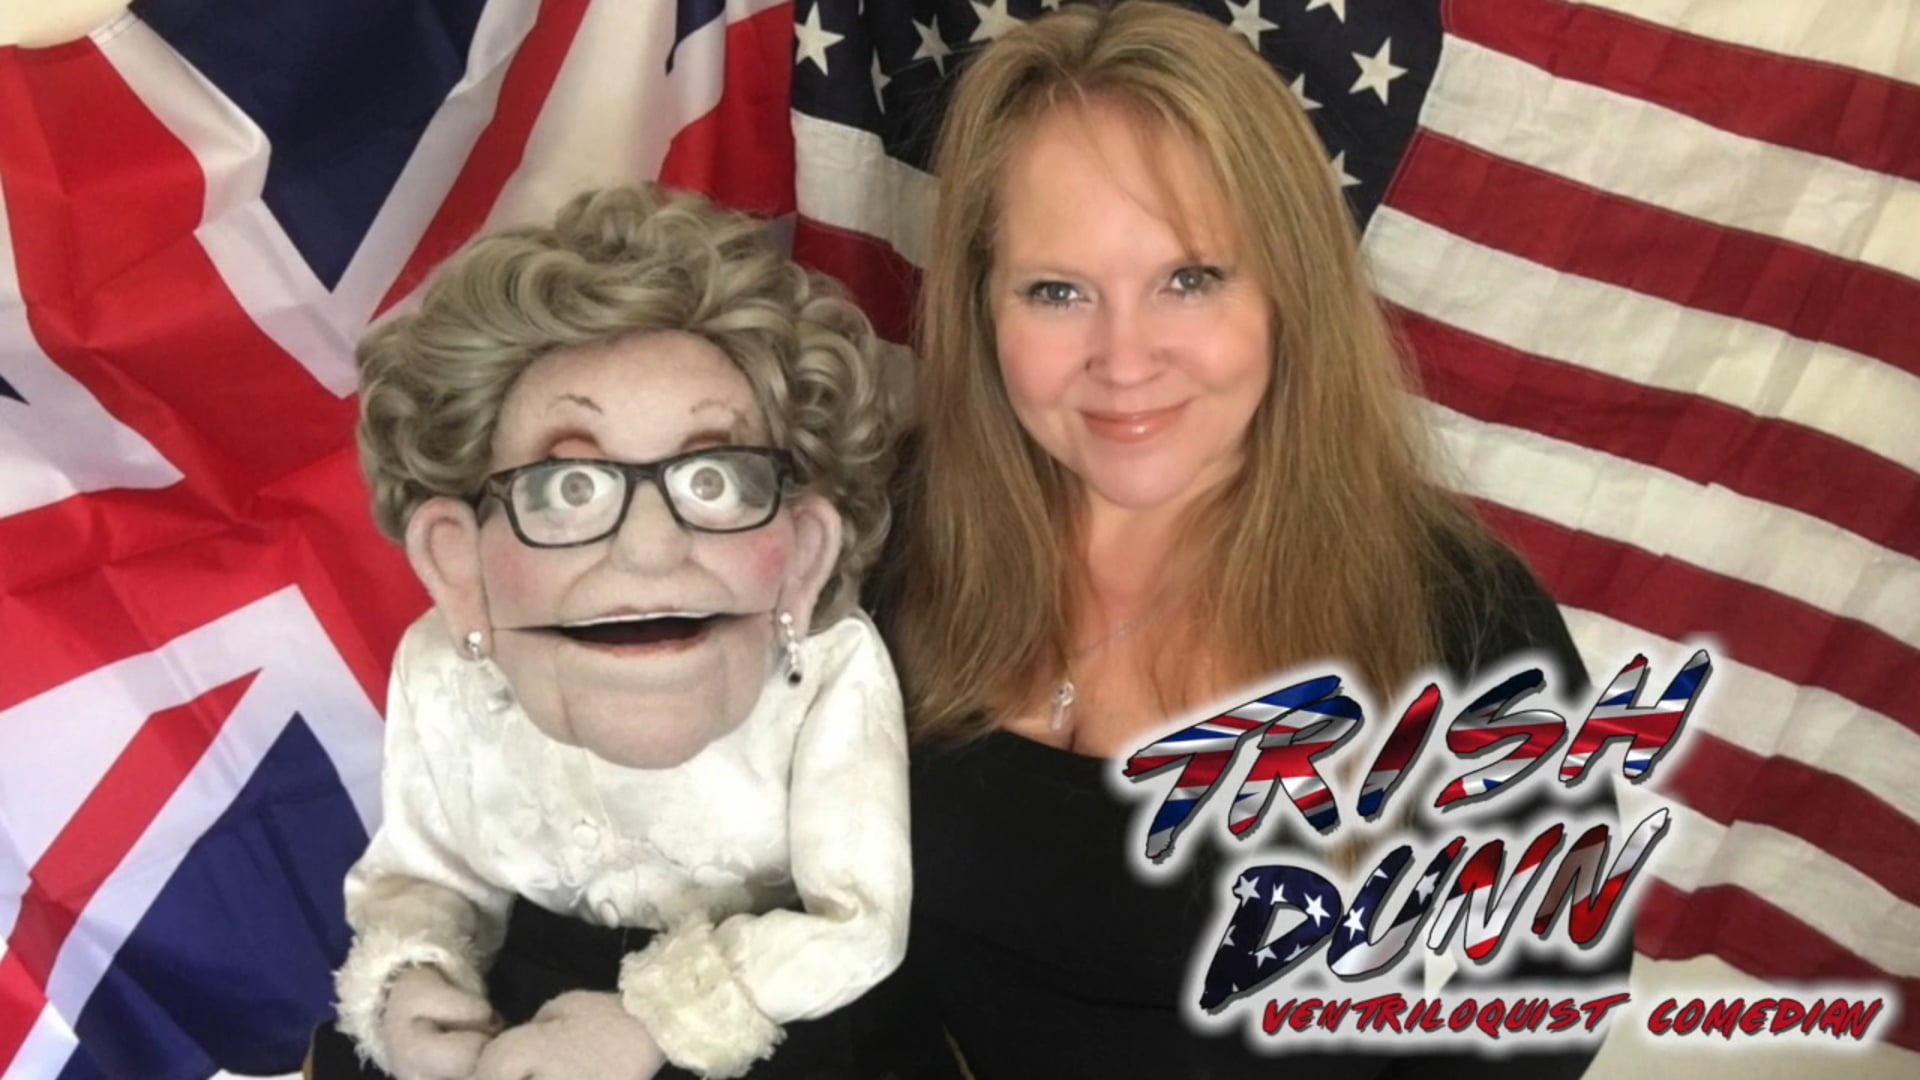 Promotional video thumbnail 1 for Trish Dunn, Ventriloquist/Comedian